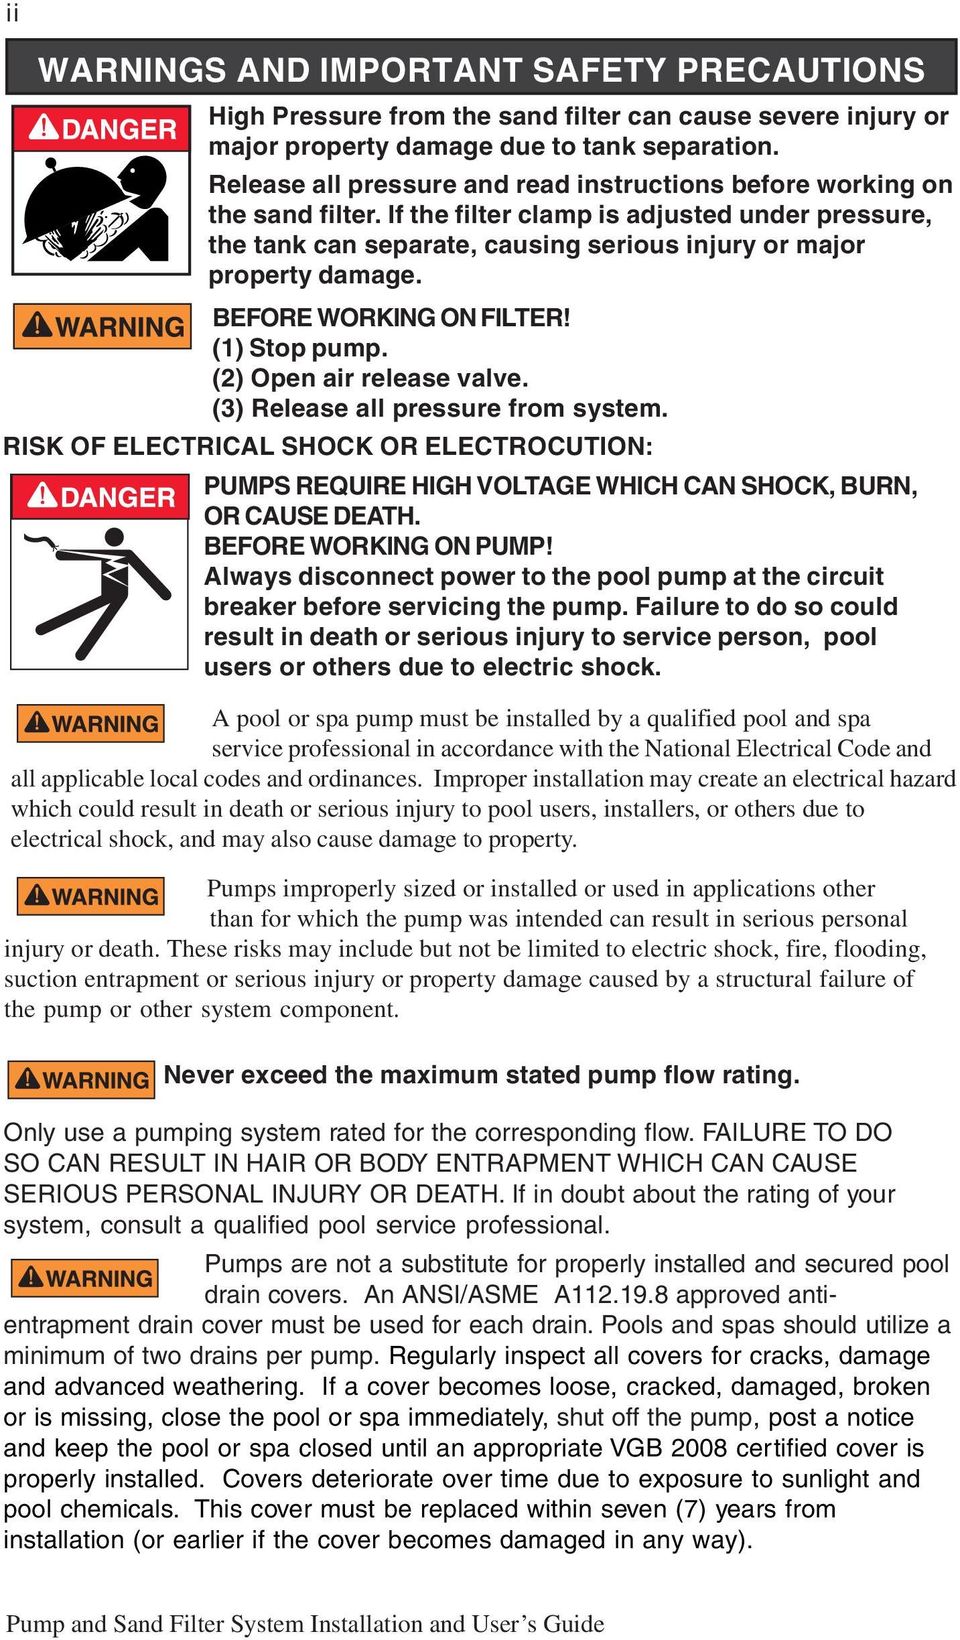 RISK OF ELECTRICAL SHOCK OR ELECTROCUTION: PUMPS REQUIRE HIGH VOLTAGE WHICH CAN SHOCK, BURN, OR CAUSE DEATH. BEFORE WORKING ON PUMP!